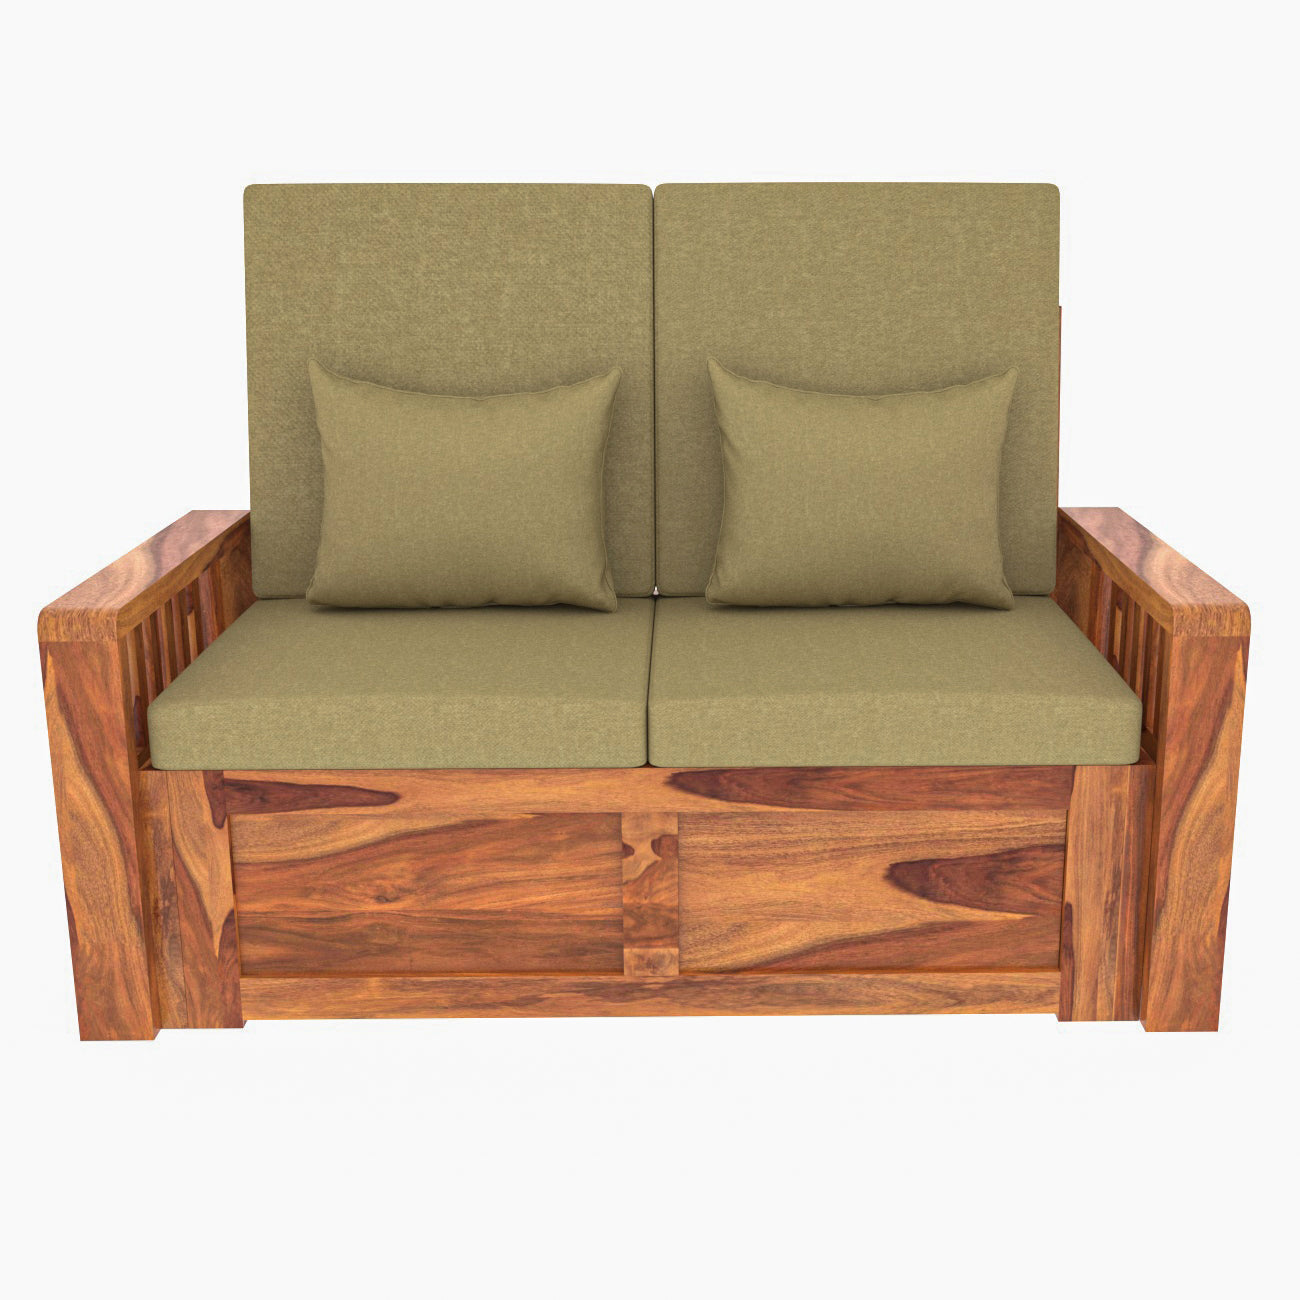 Moss Green Vintage Sheesham Wooden 2 Seater Sofa with Storage Sofa